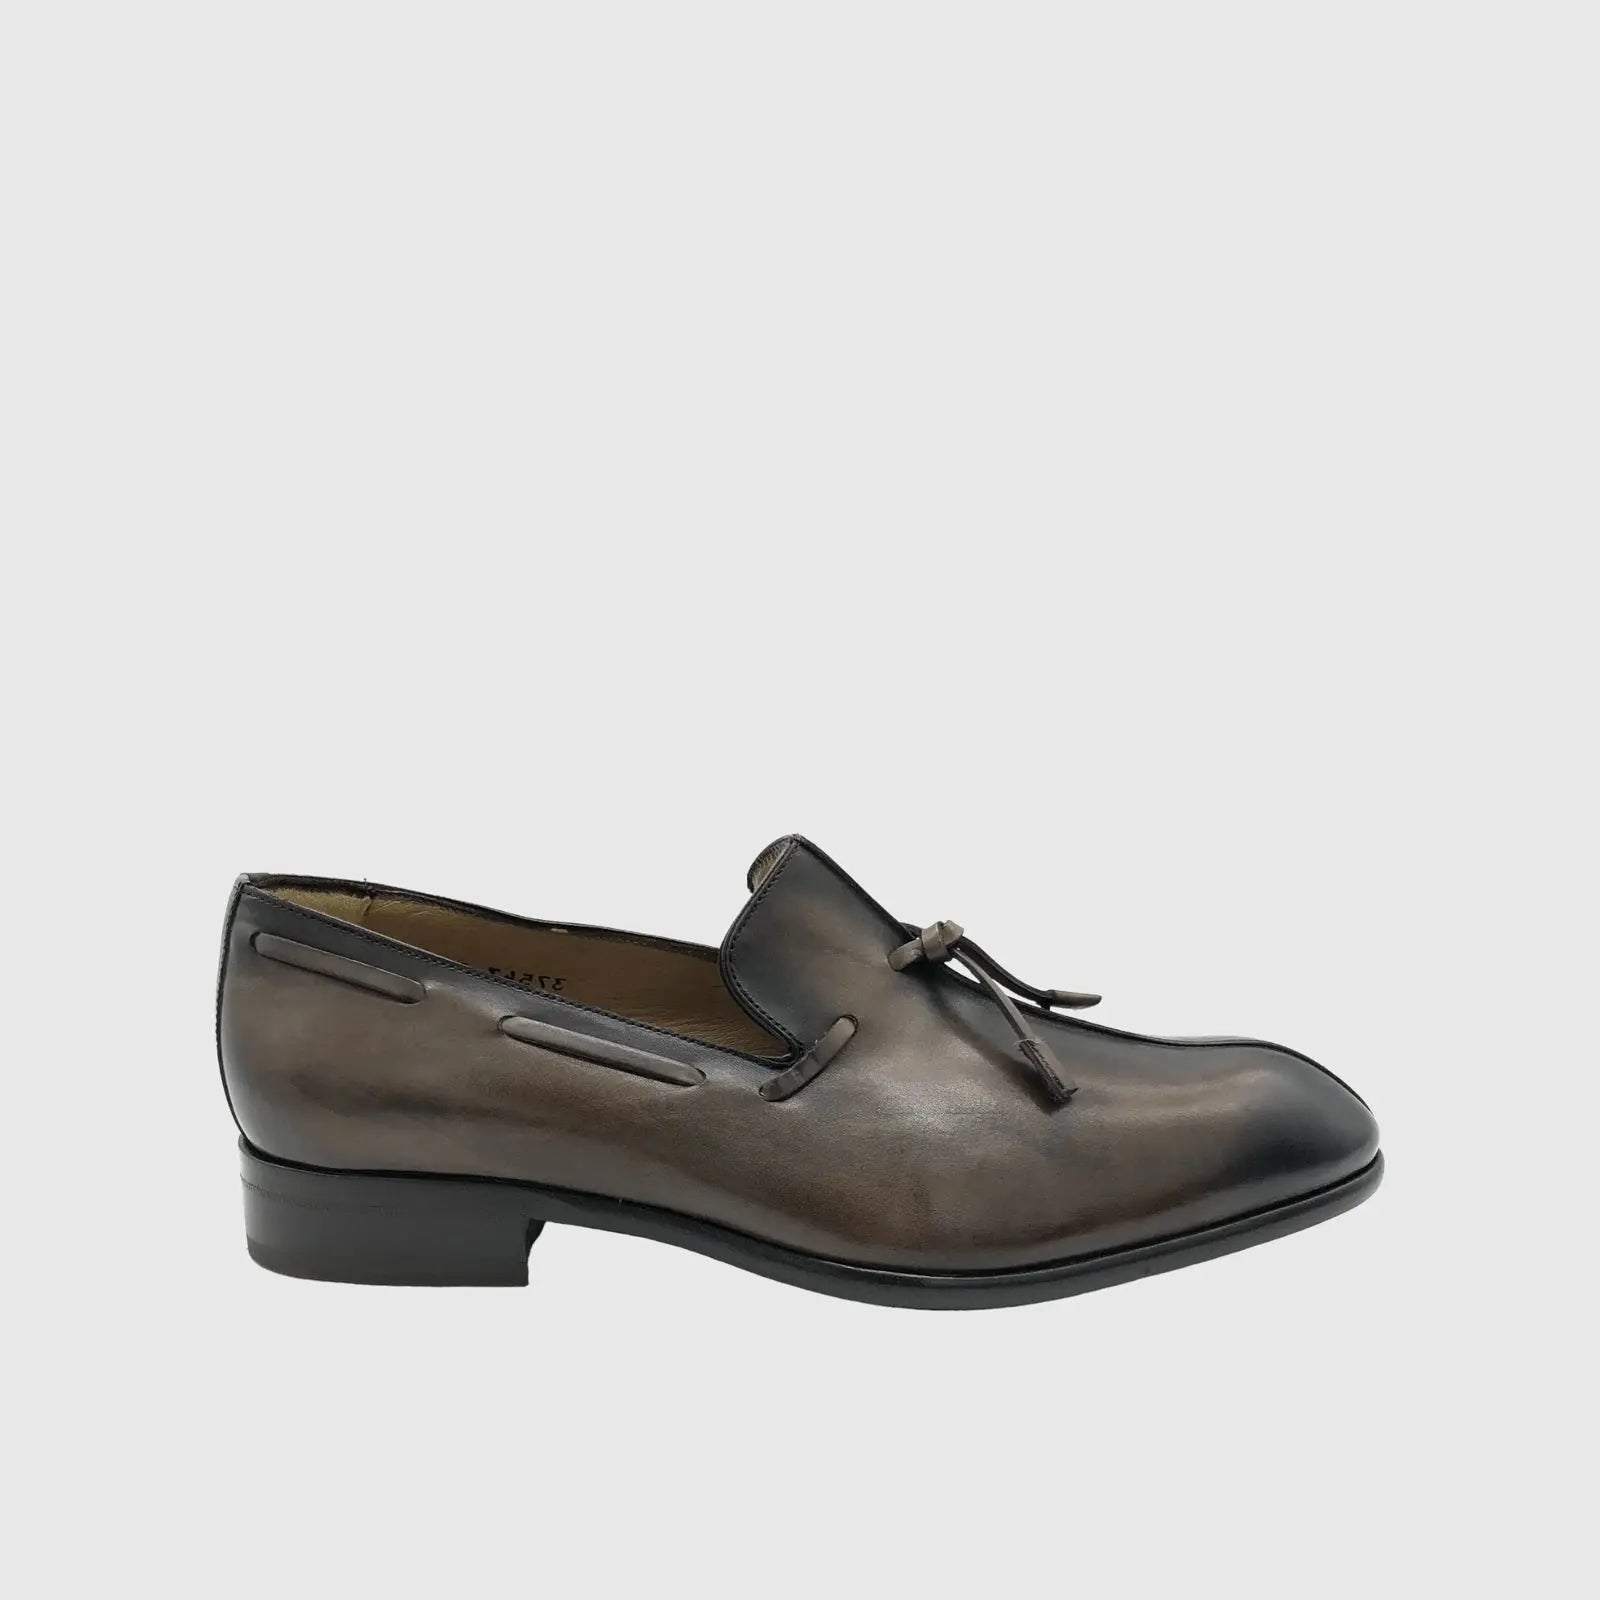 MISTER 37543 BROWN Loafers | familyshoecentre